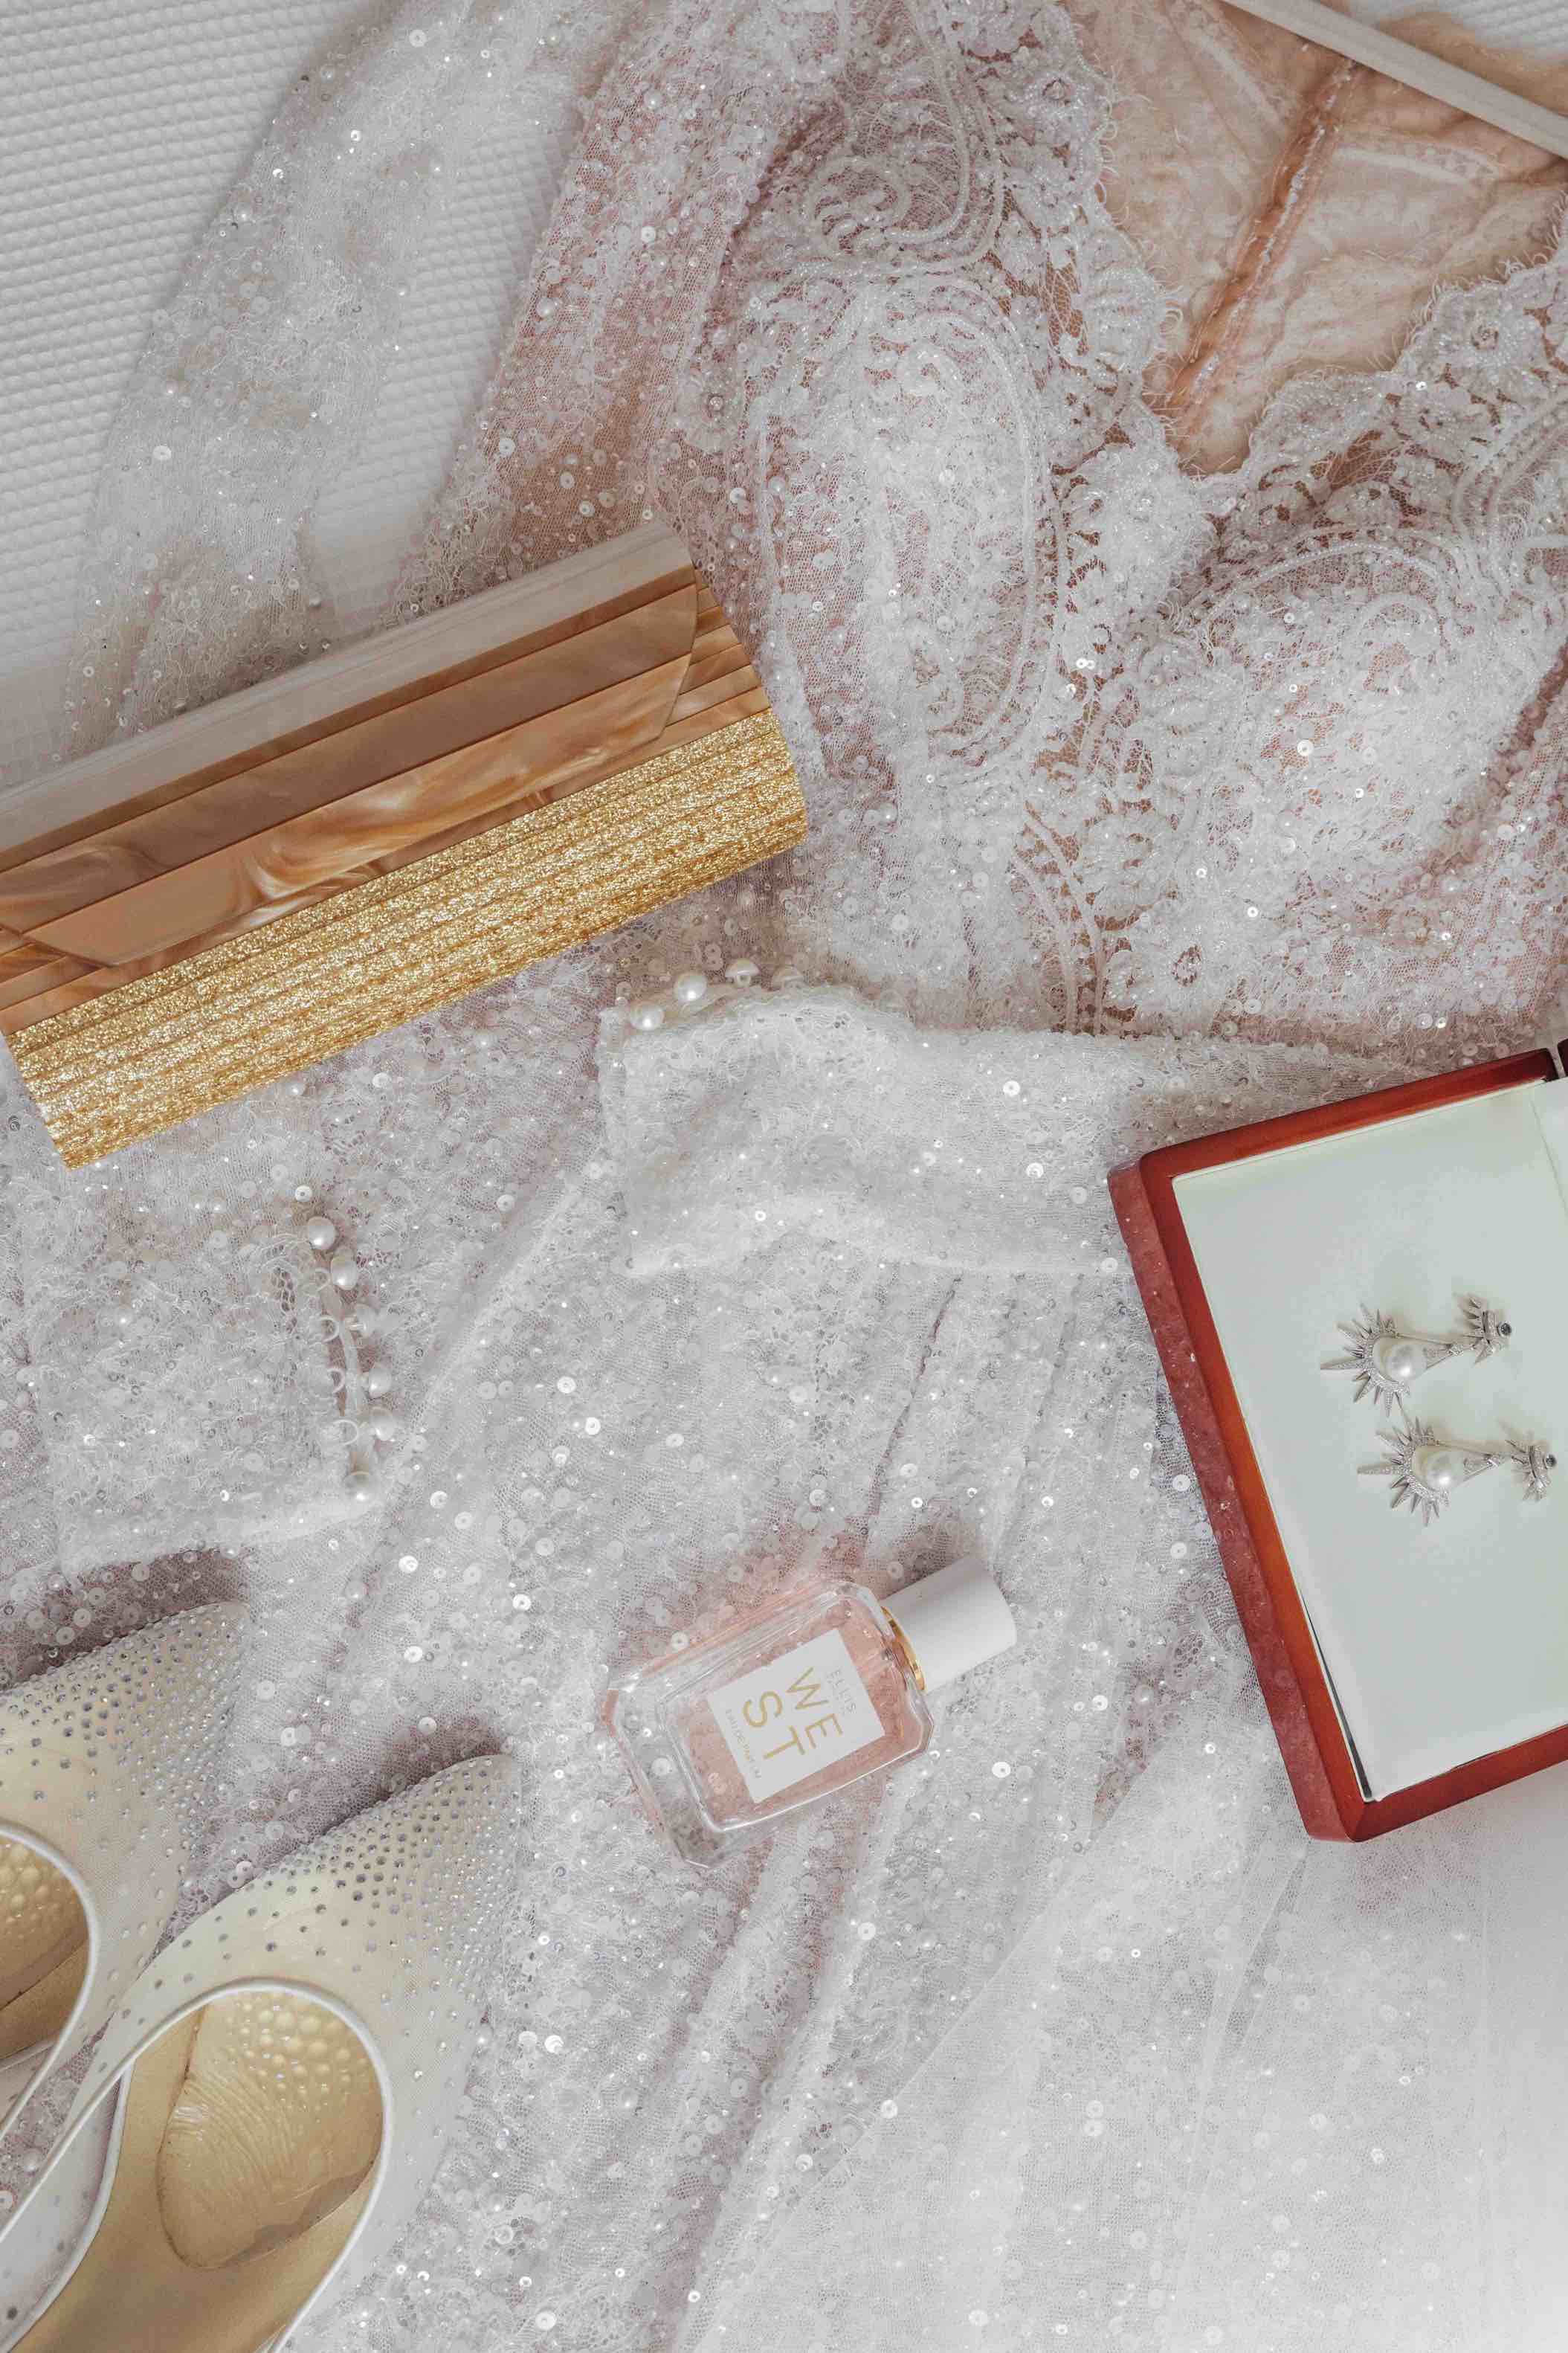 wedding dress with clutch heels earrings and perfume laid out on bed before wedding day